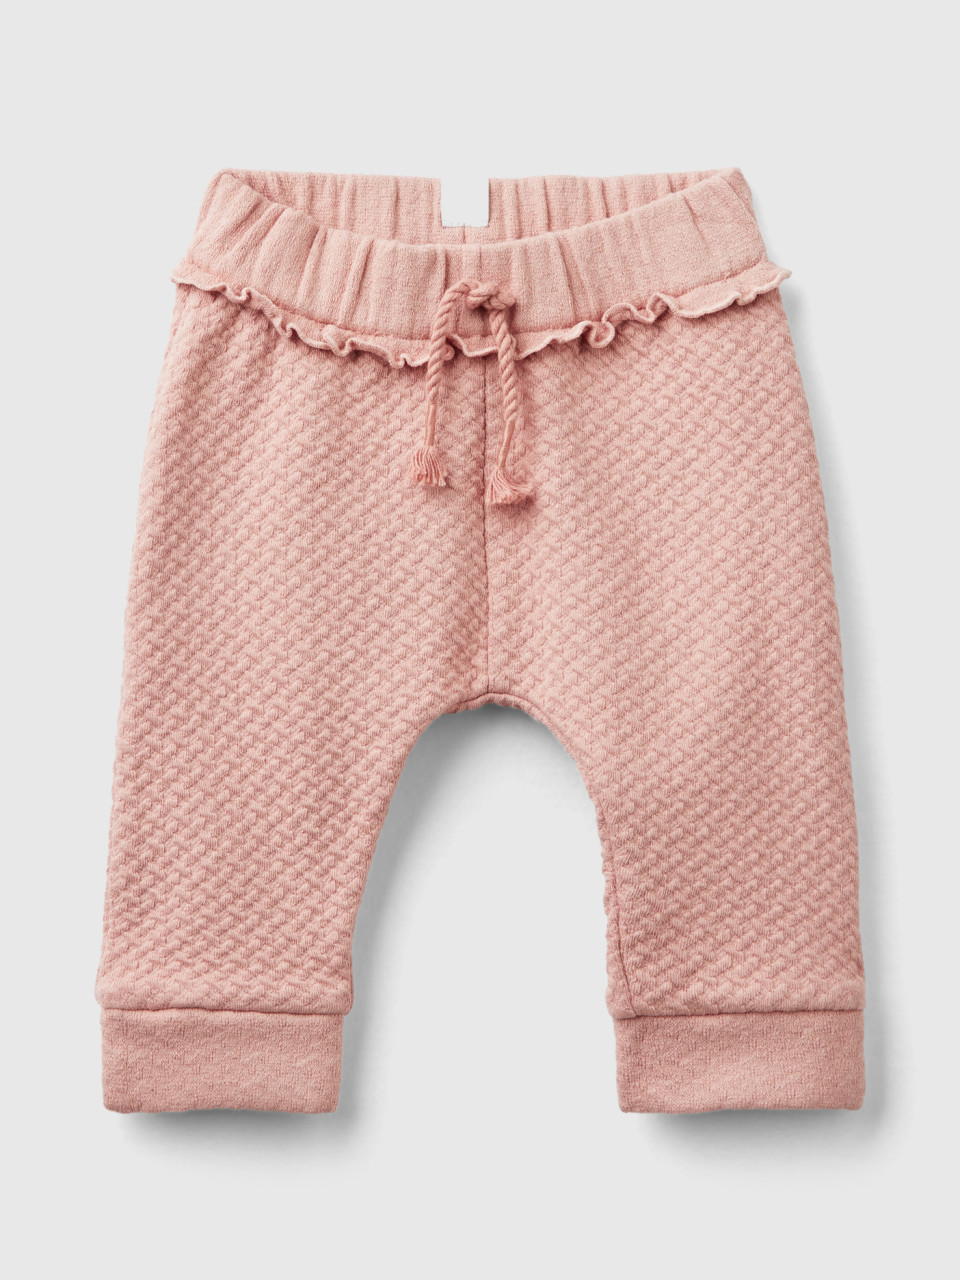 Benetton, Jacquard Trousers With Slits, Soft Pink, Kids